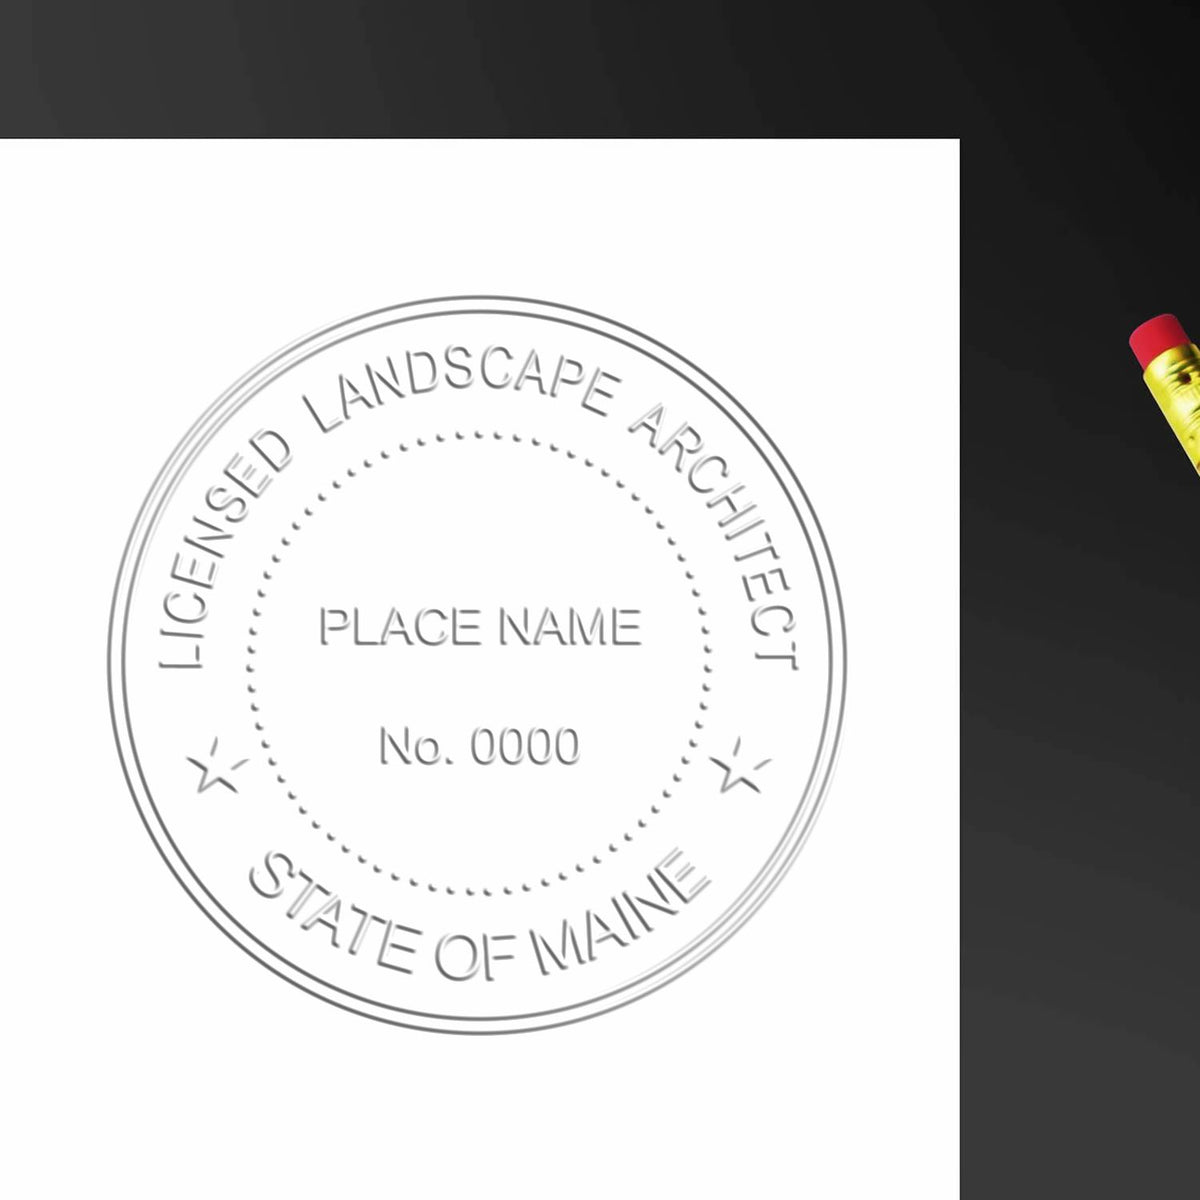 The Gift Maine Landscape Architect Seal stamp impression comes to life with a crisp, detailed image stamped on paper - showcasing true professional quality.